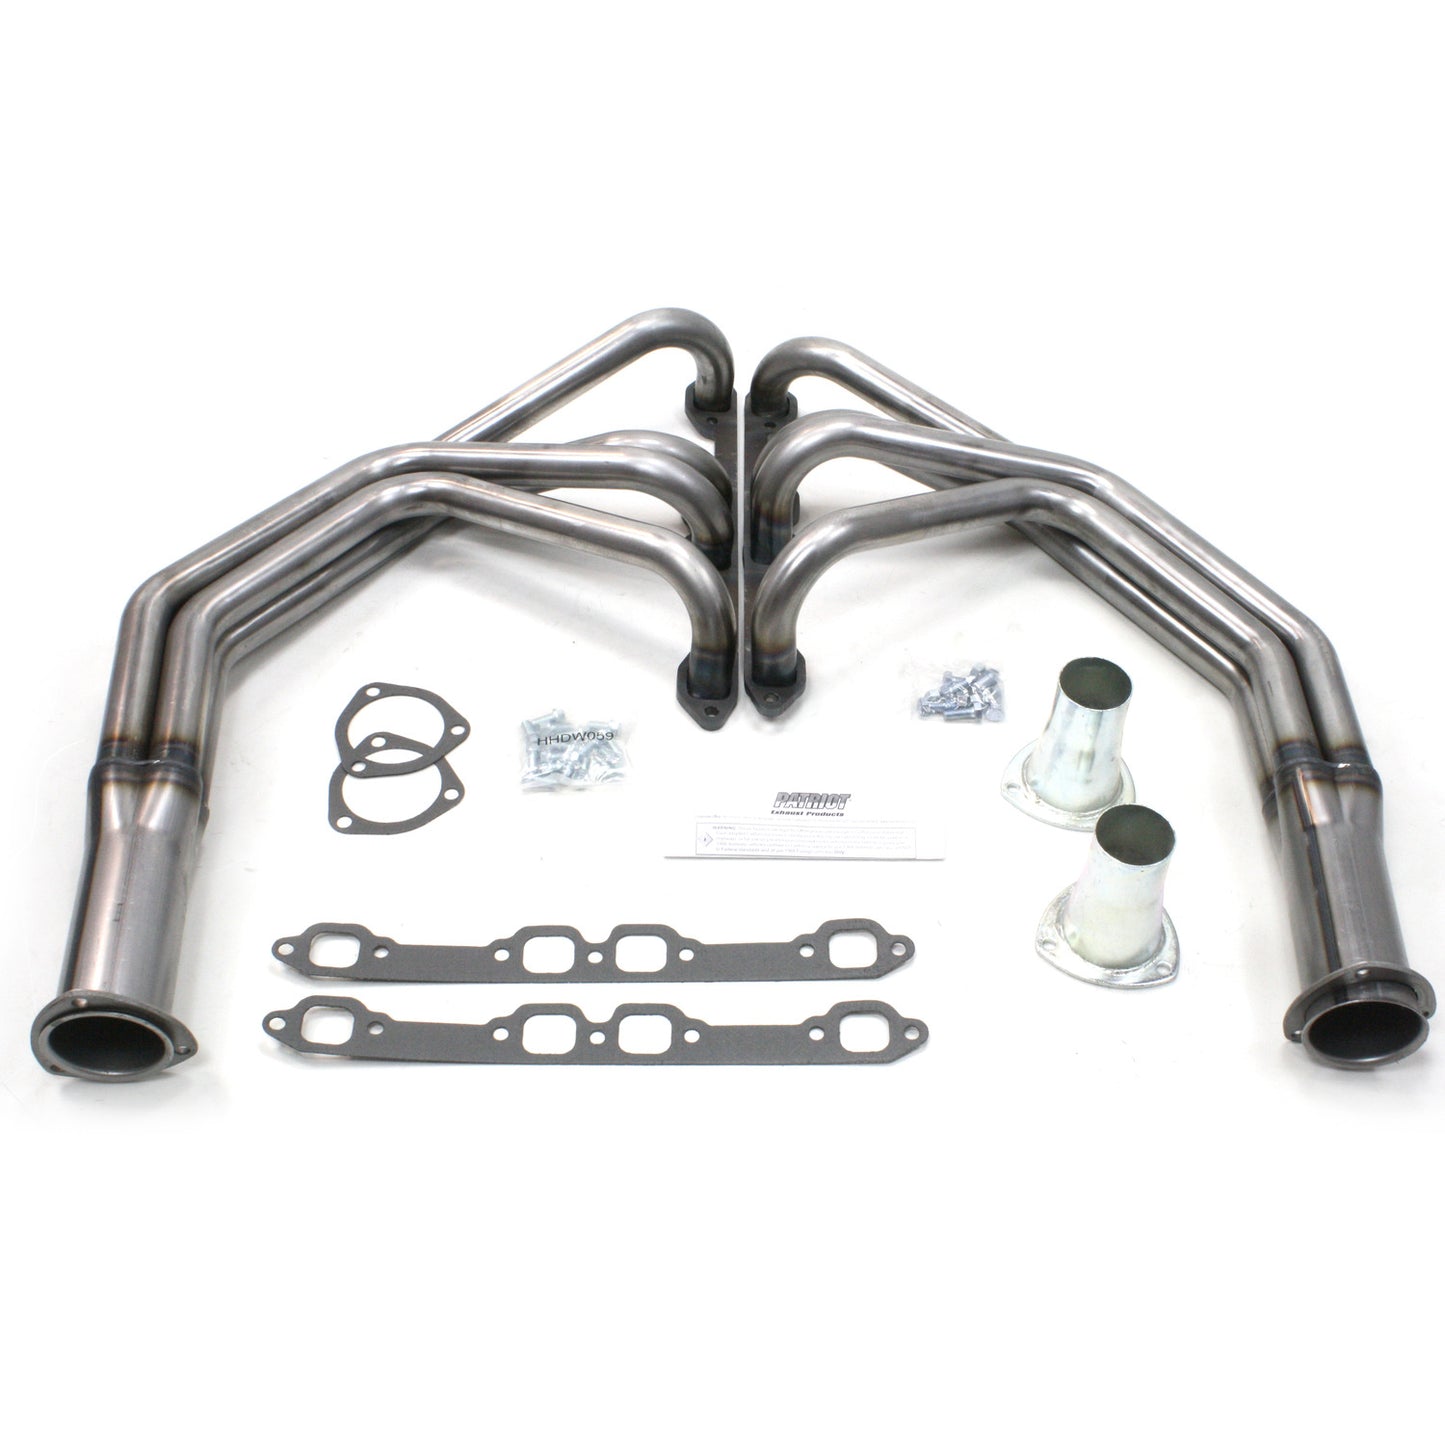 Patriot Exhaust H8422 1 1/2" Full Length Header Ford Truck 292Y 53-56 Raw Steel